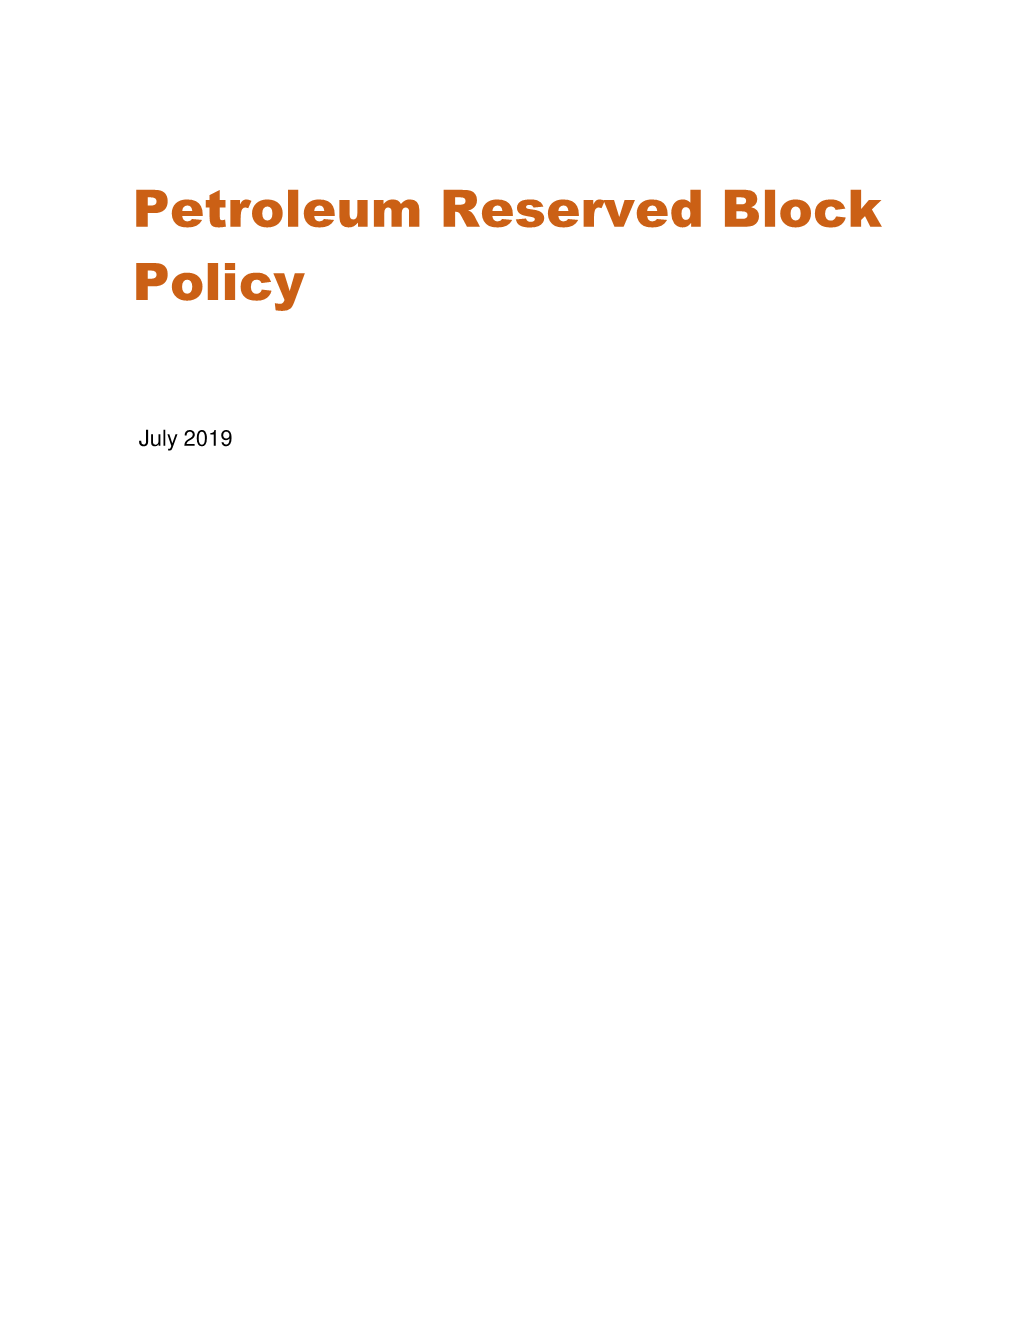 Petroleum Reserved Block Policy